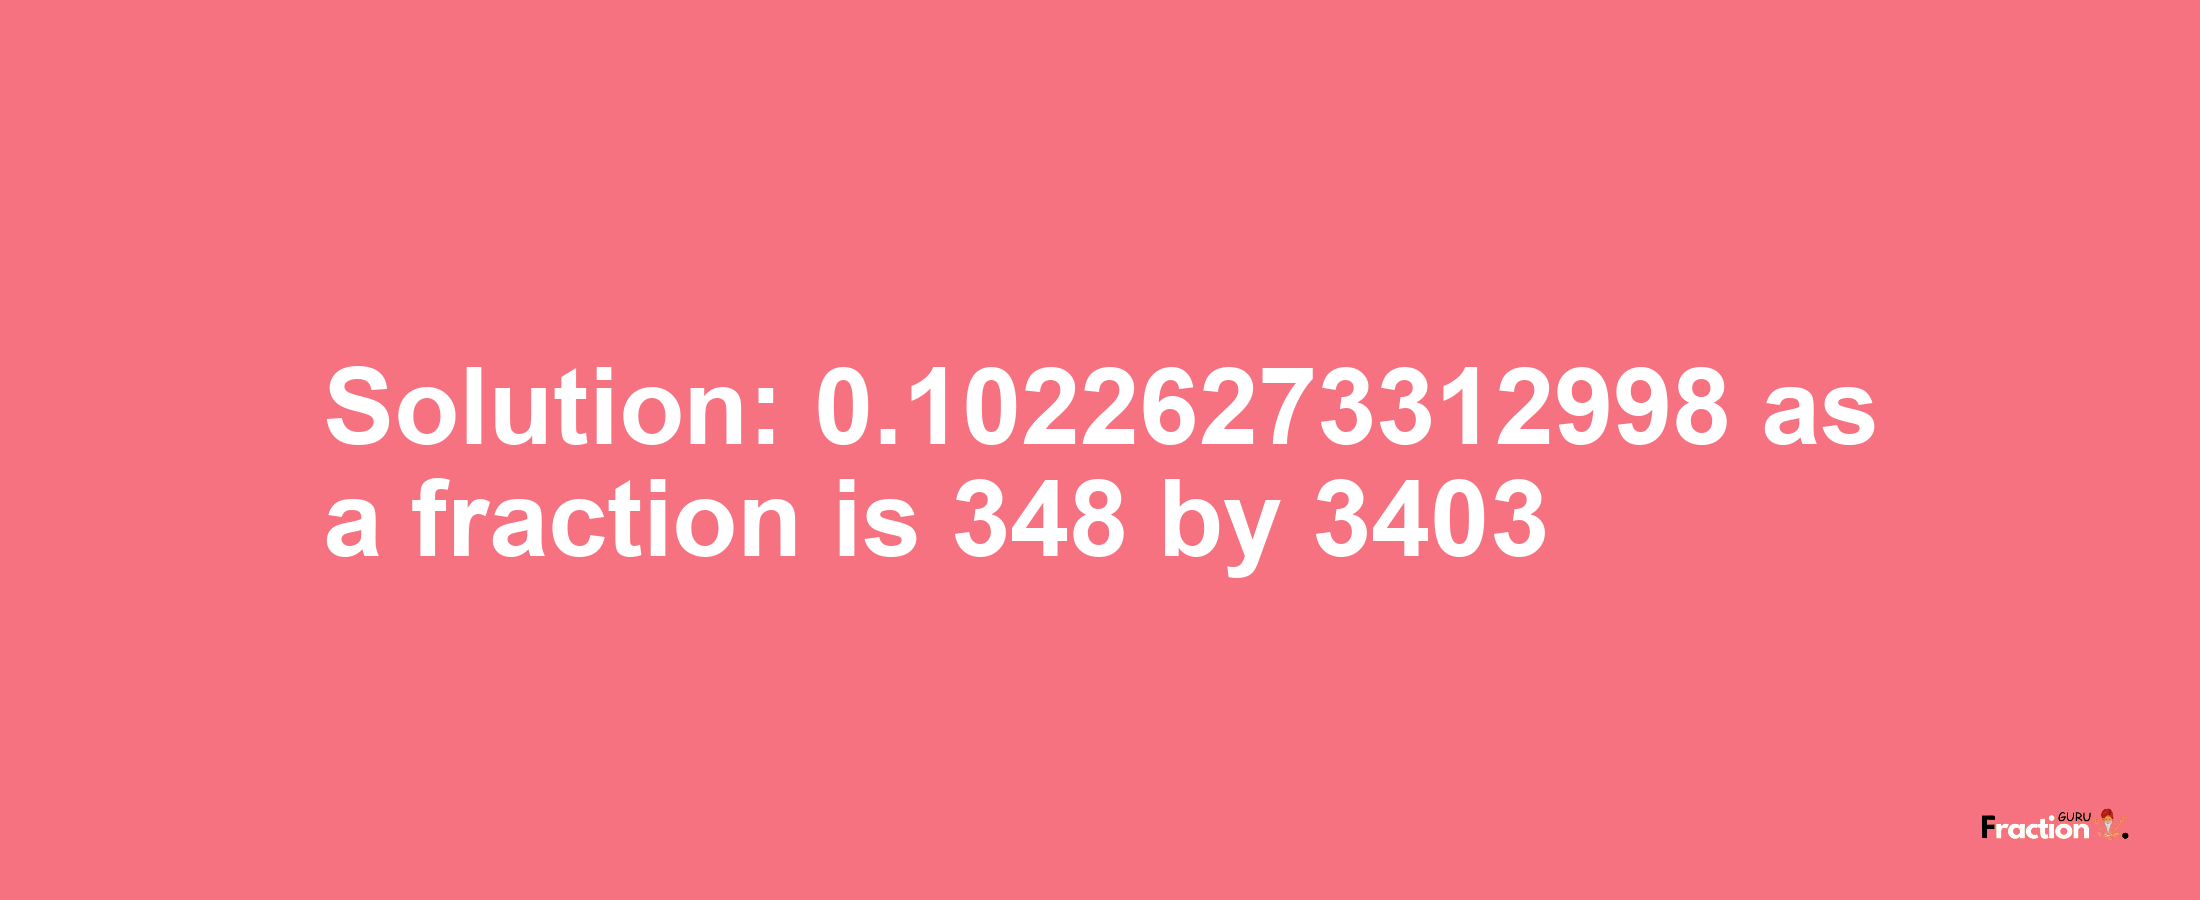 Solution:0.10226273312998 as a fraction is 348/3403